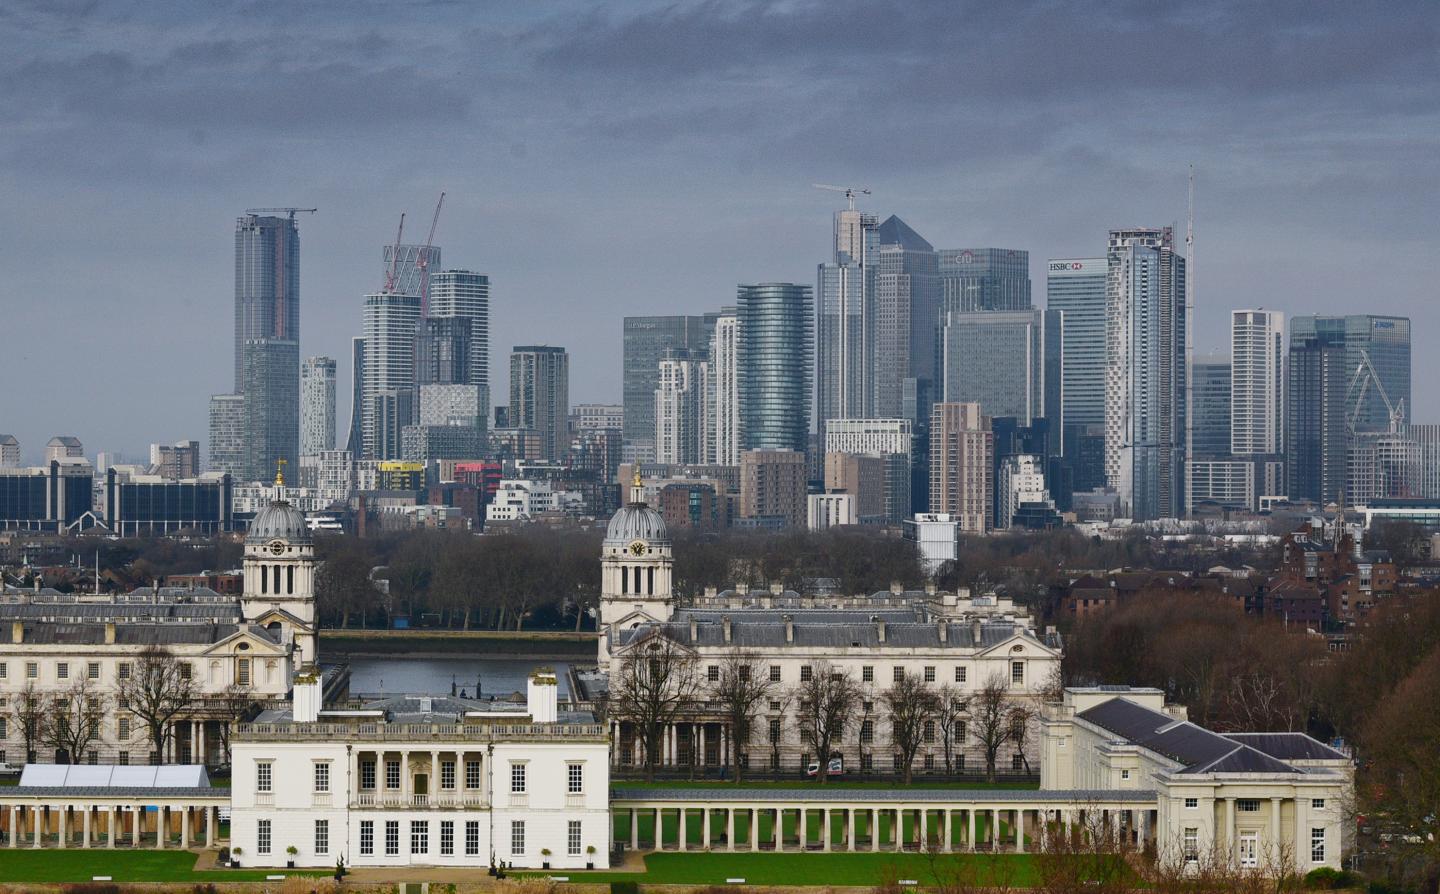 Queen's House and the Canary Wharf skyline